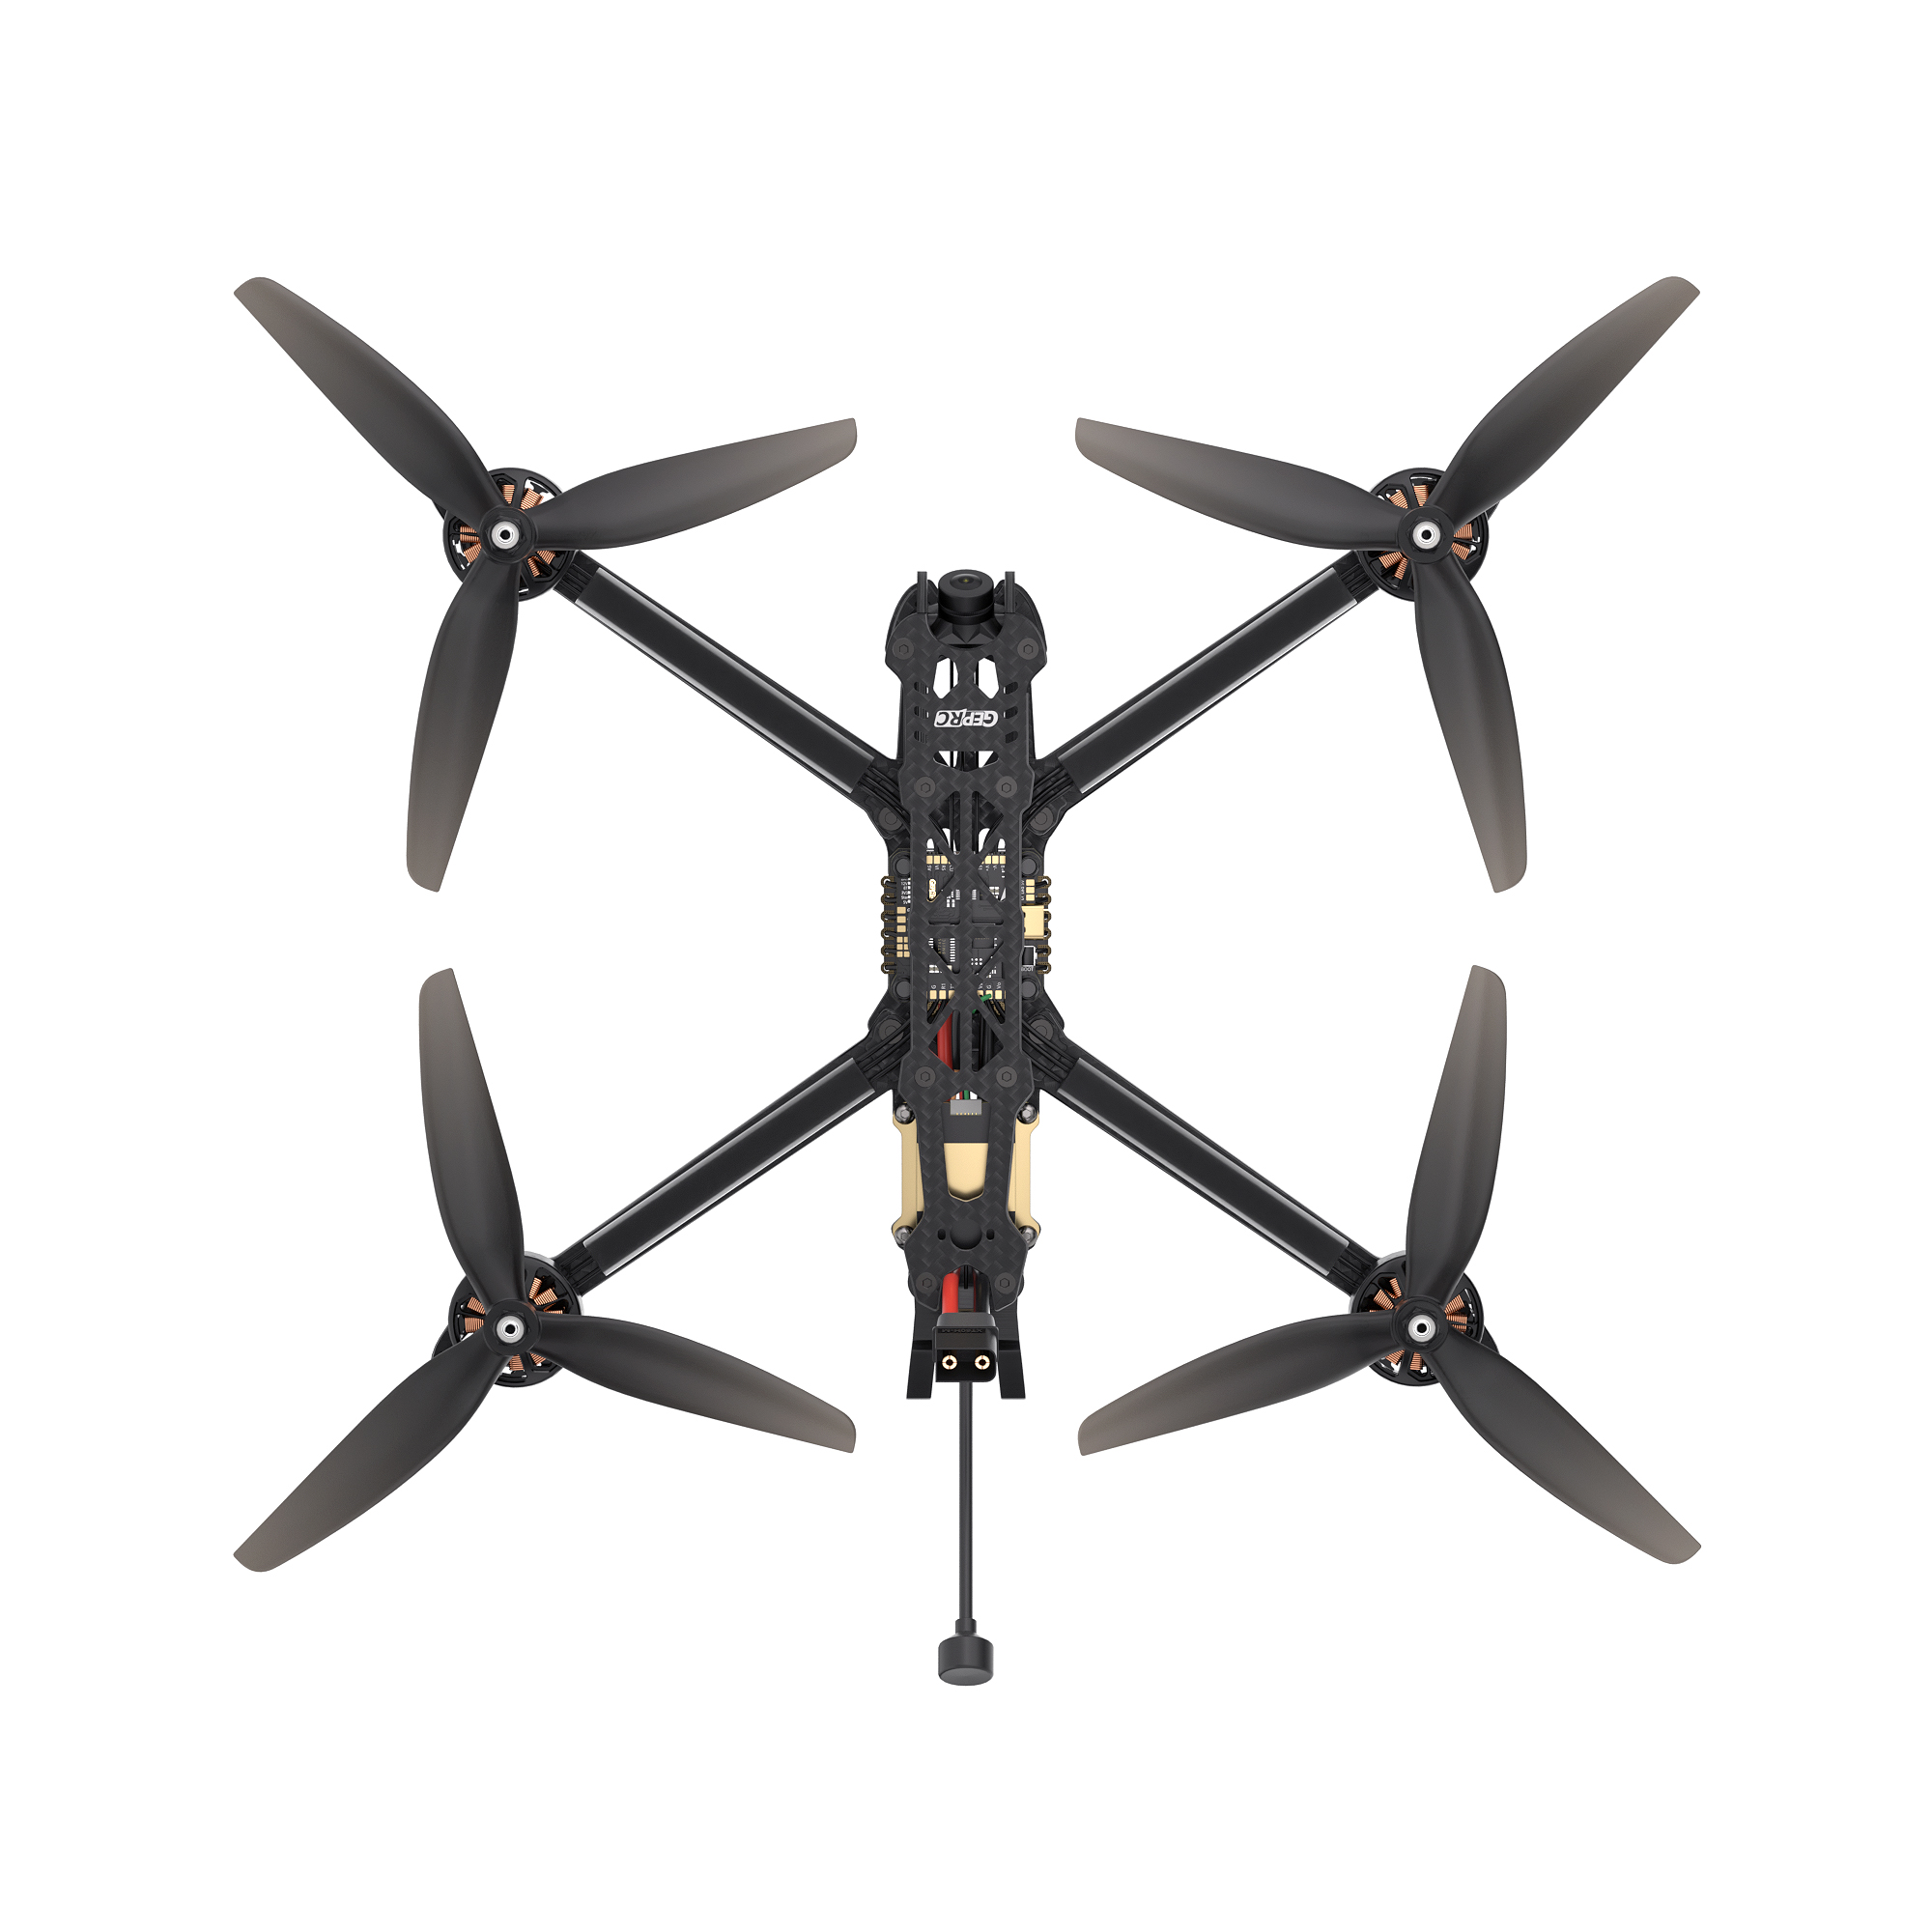 AI FPV Follow Drone Precision Guidance Real-time Tracking of People And Vehicles Automatic Flying Drone